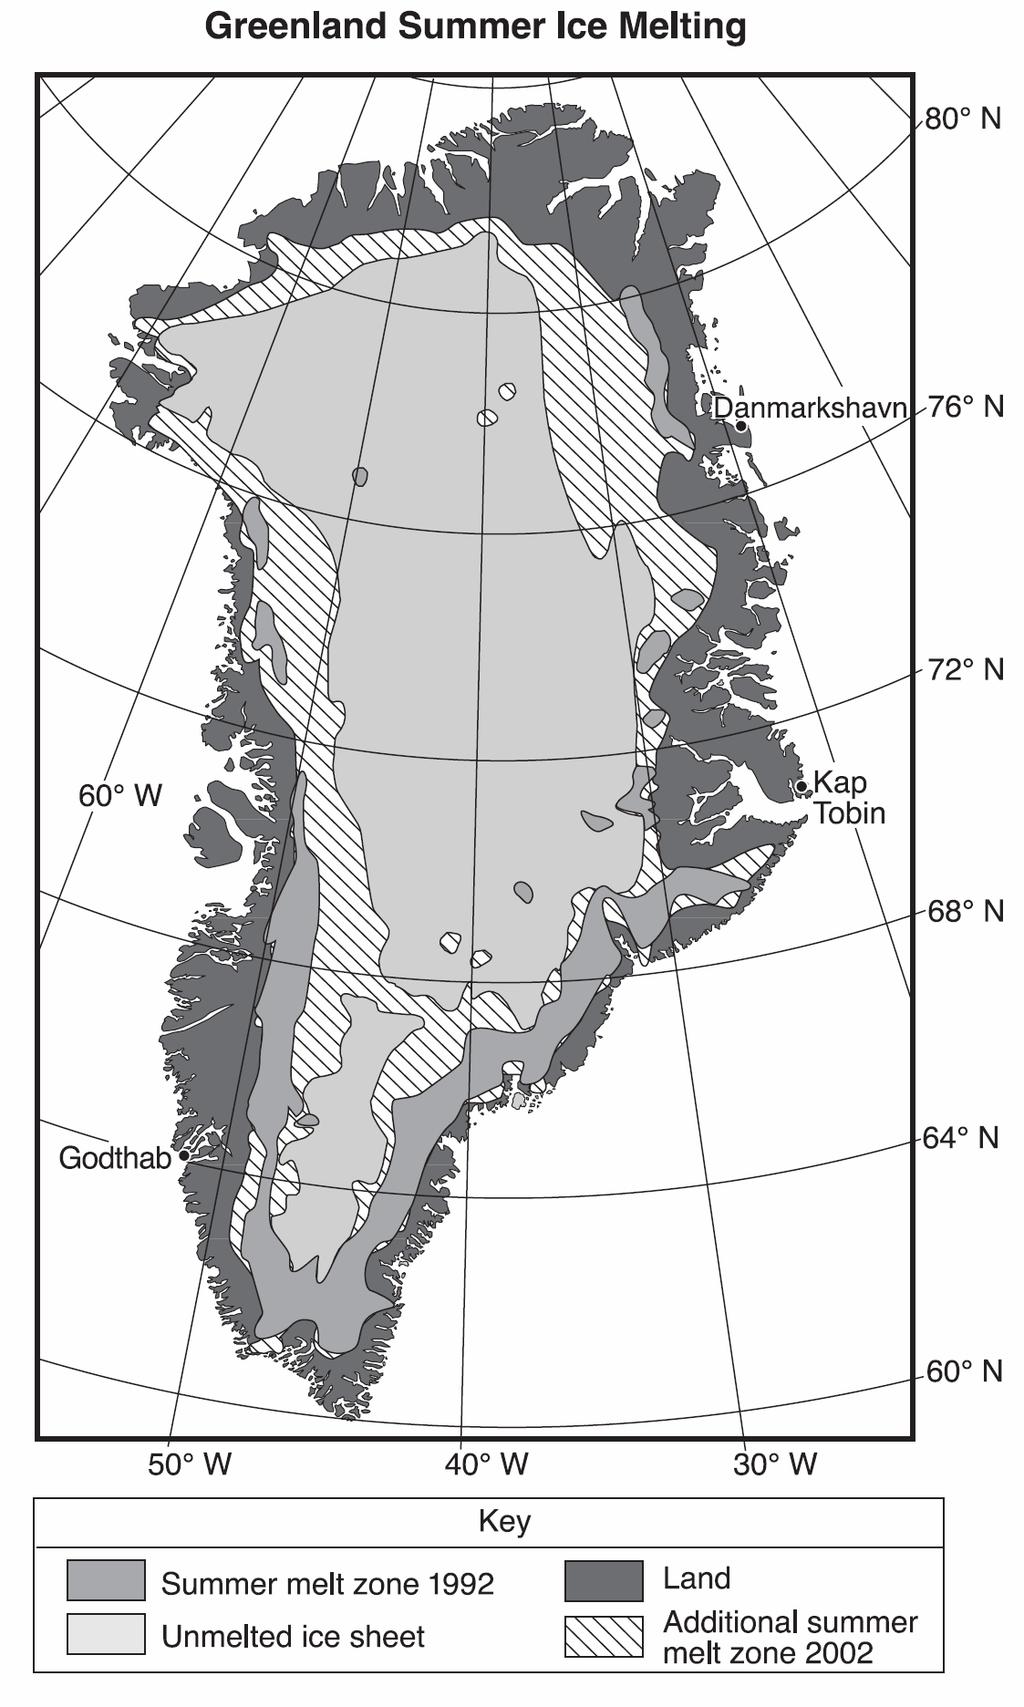 13. Base your answer to the following question on the following map and passage. The map shows the extent of summer ice-melt zones on Greenland in 1992 and 2002.